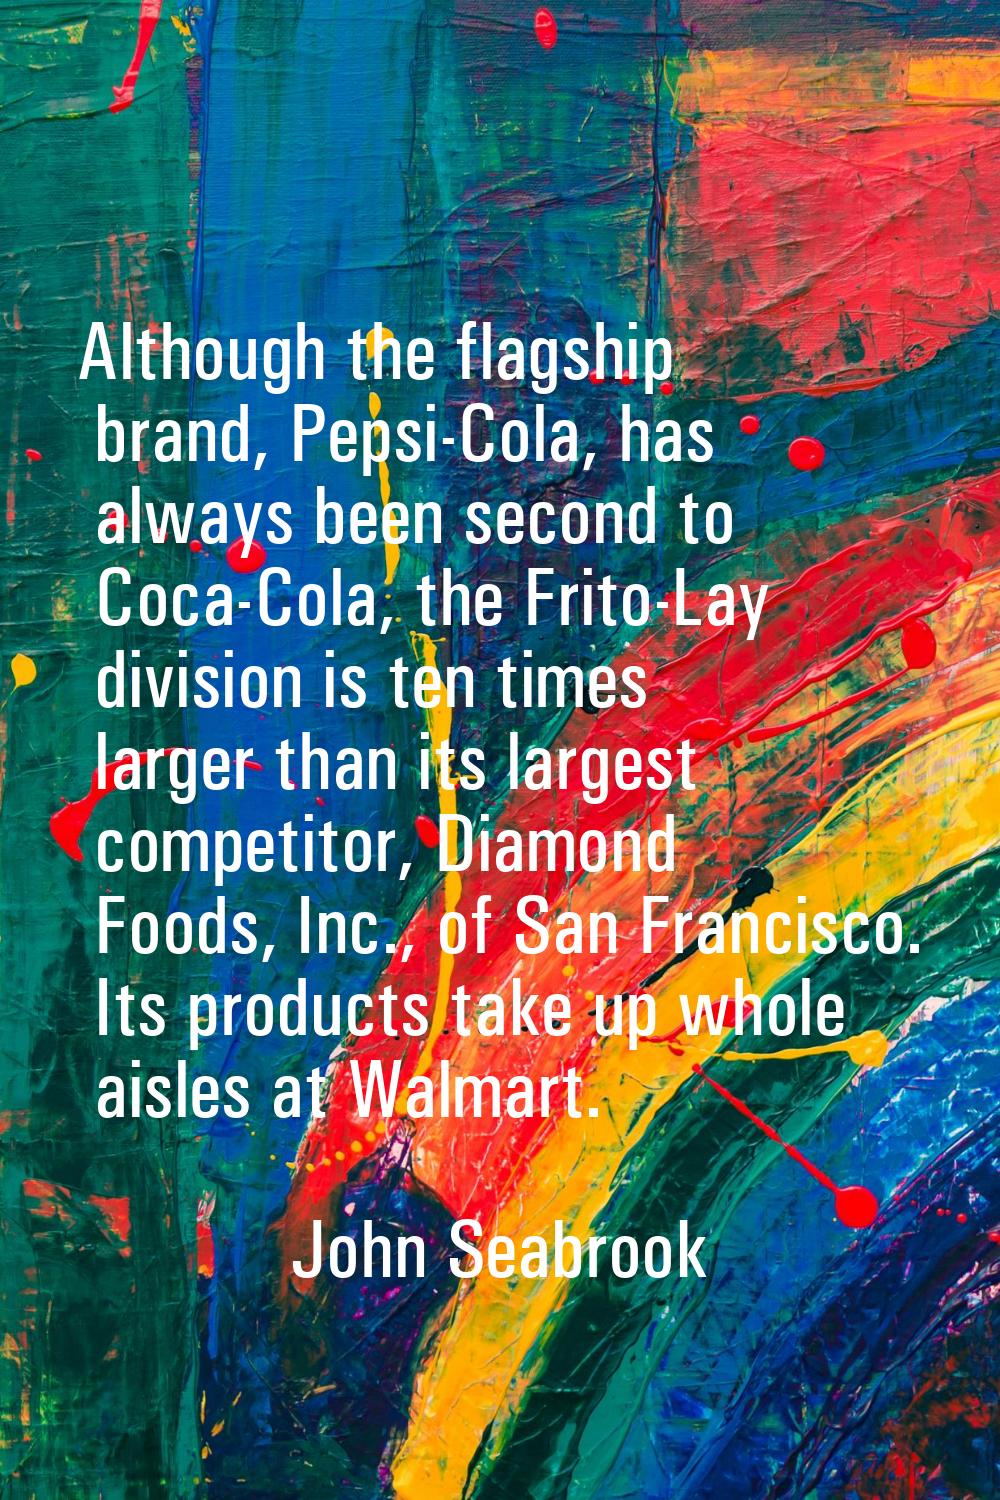 Although the flagship brand, Pepsi-Cola, has always been second to Coca-Cola, the Frito-Lay divisio